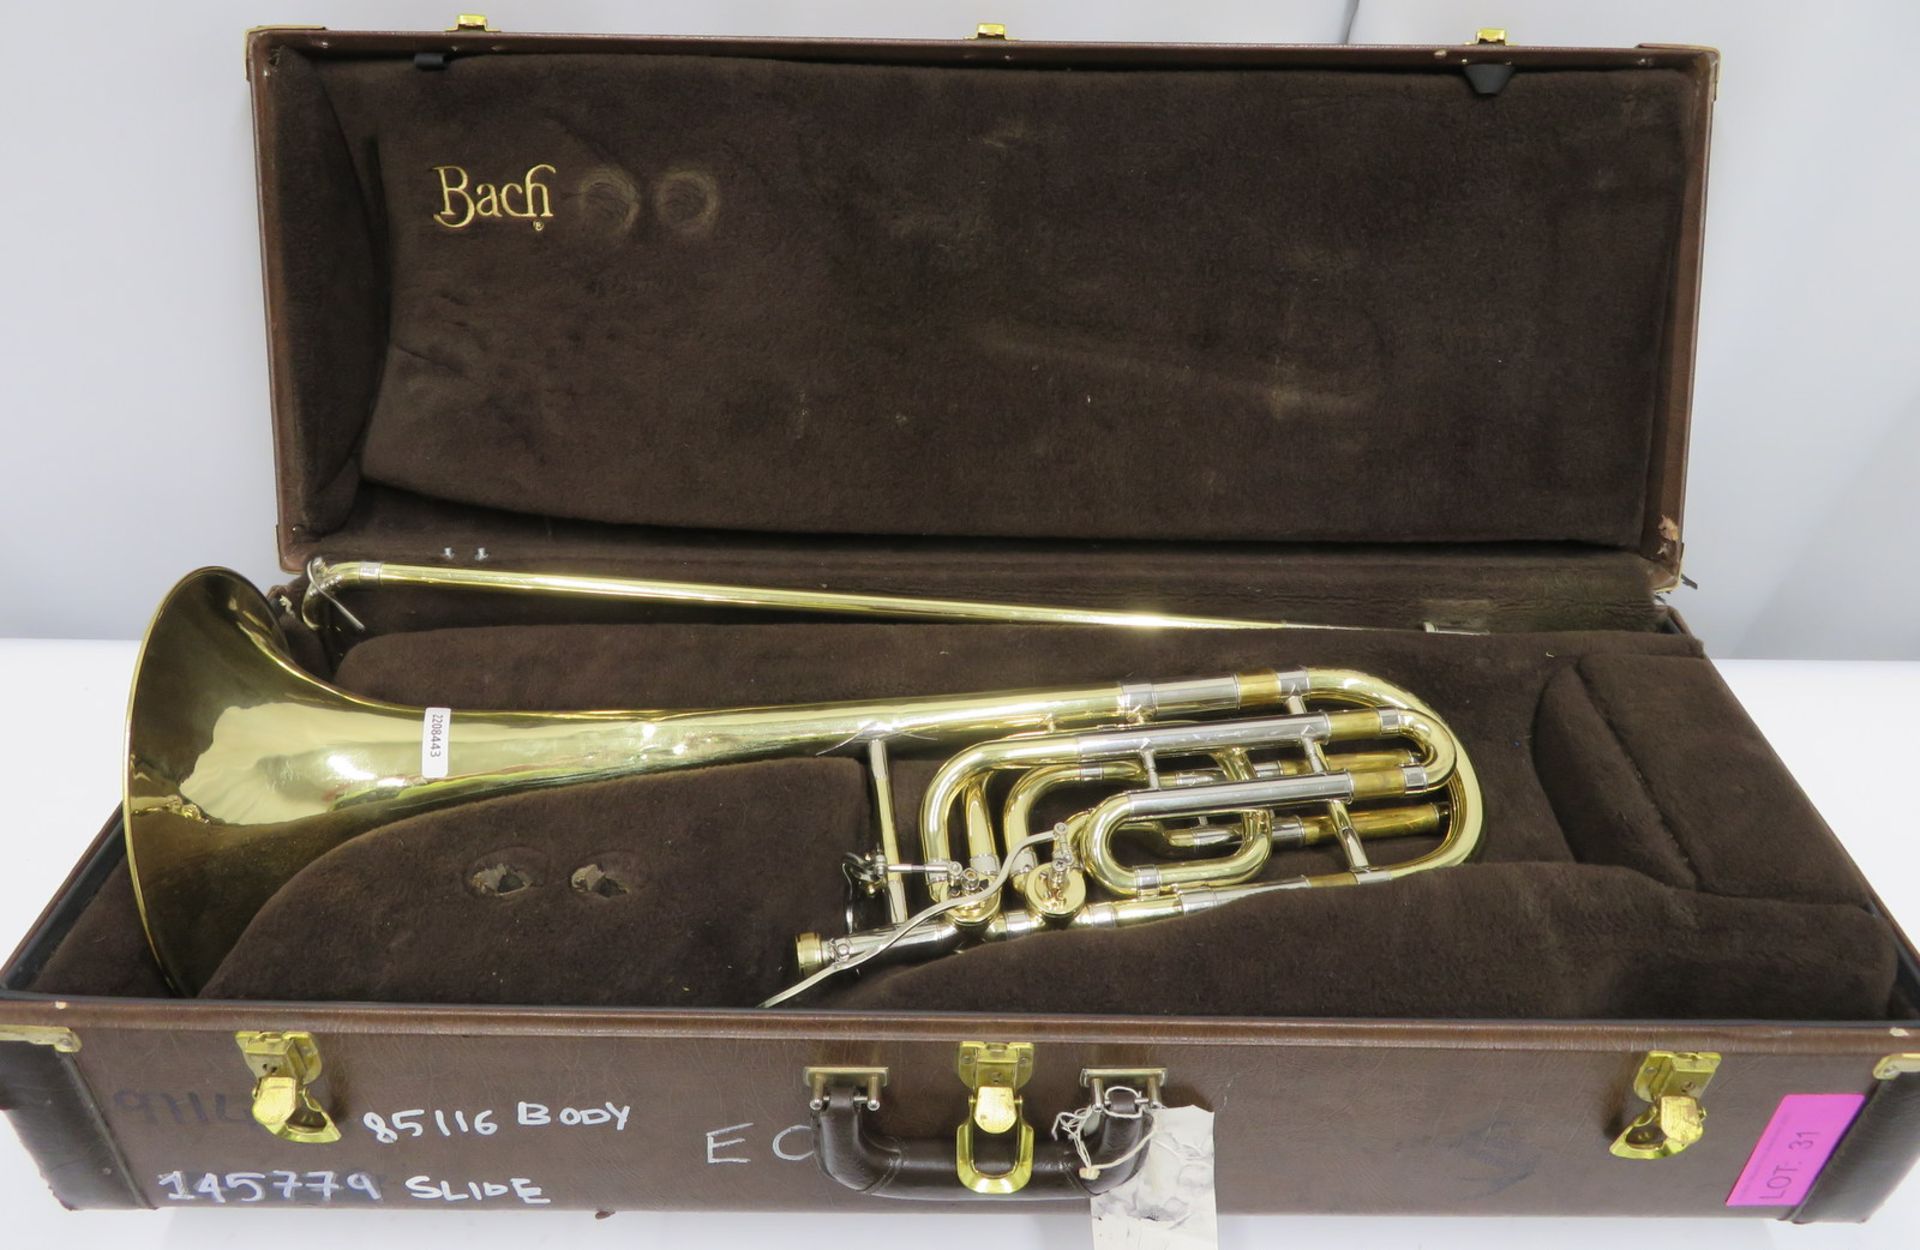 Bach Stradivarius model 50B bass trombone with case. Serial number: 85116.